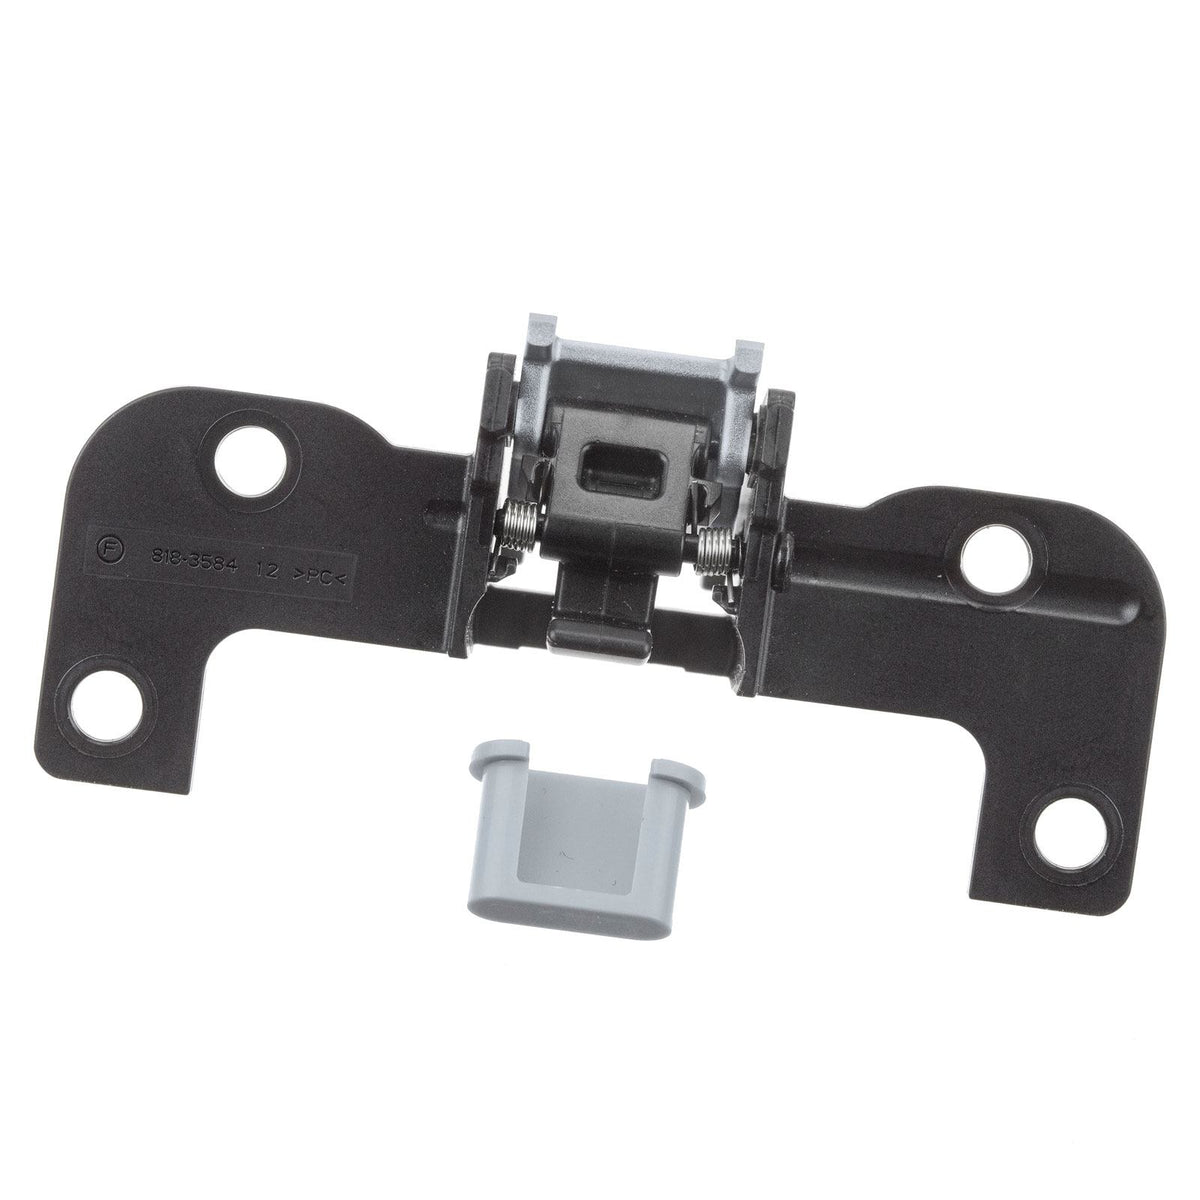 MEMORY DOOR LATCH (MDL) FOR IMAC 27" A1419 (LATE 2012)